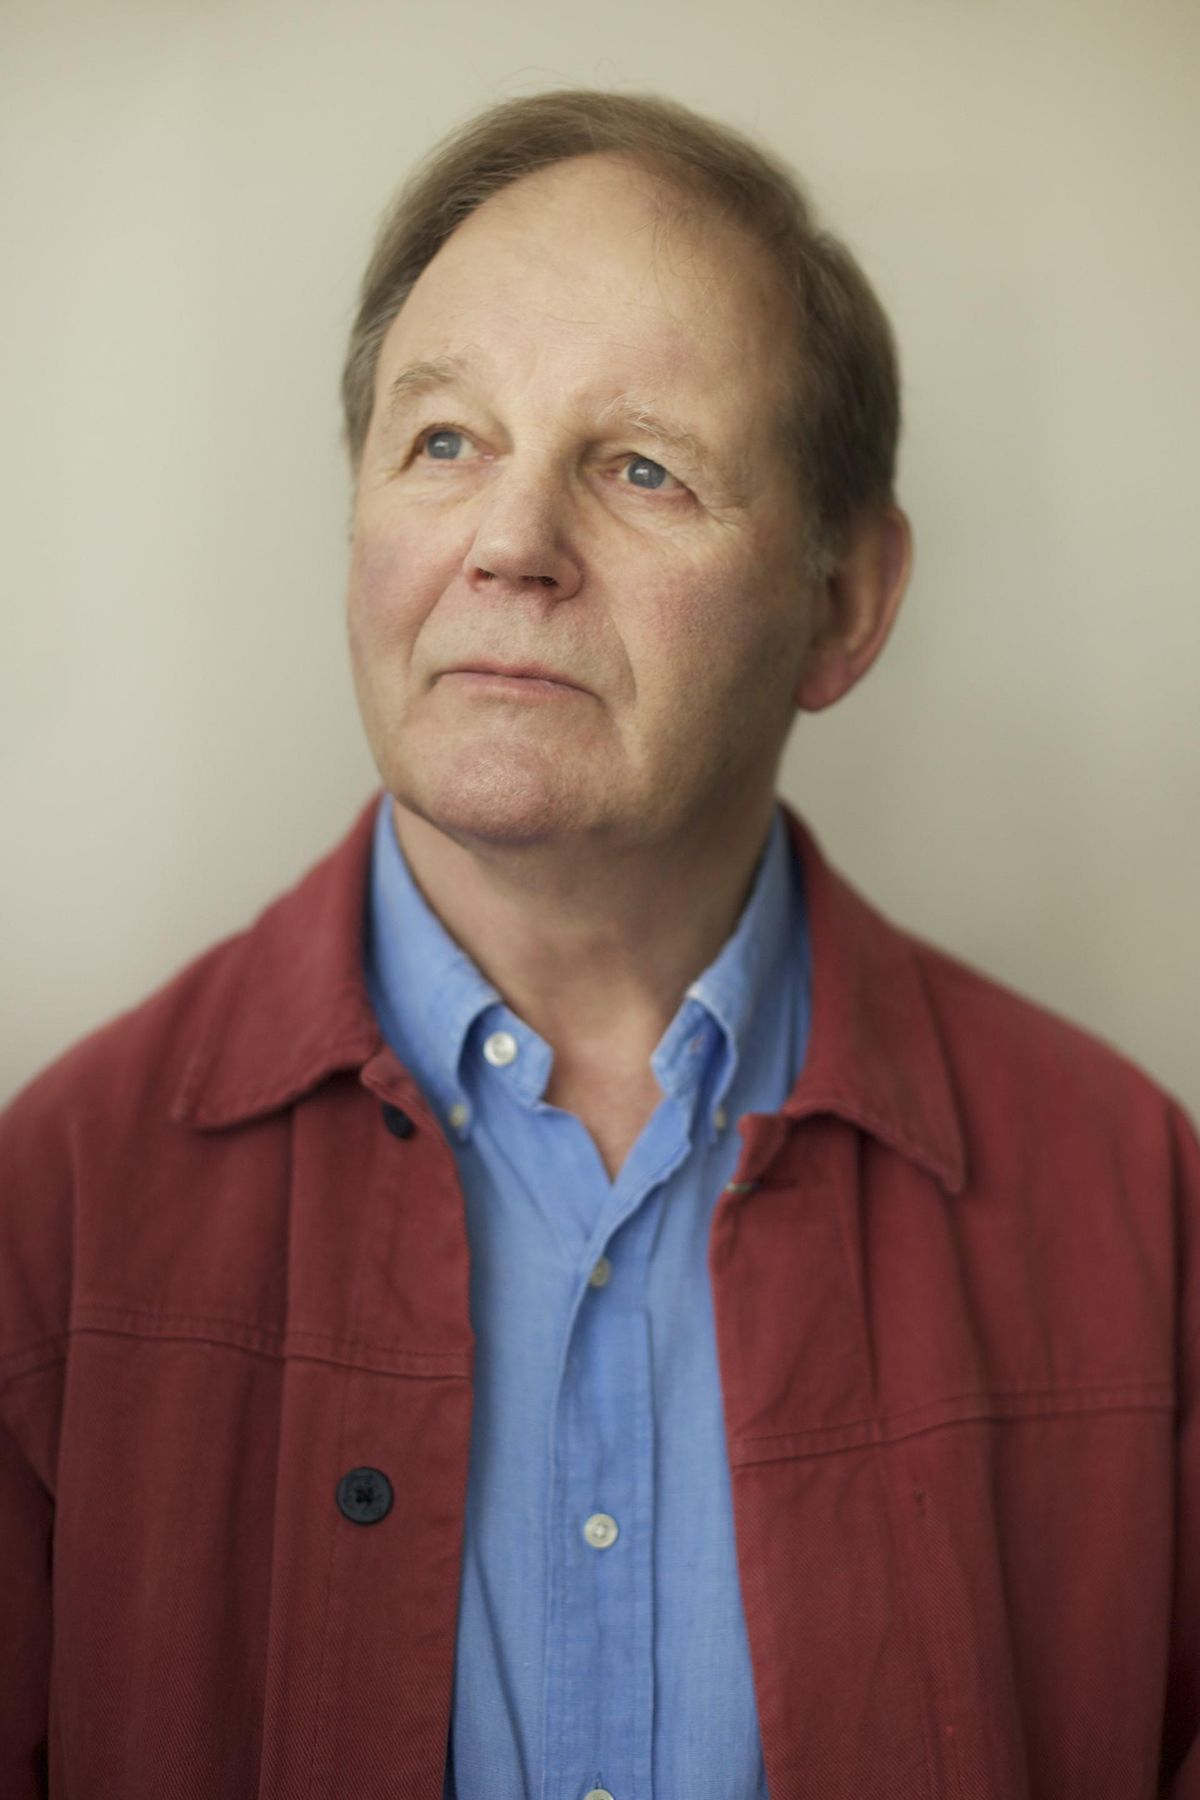 An afternoon with Sir Michael Morpurgo and Friends